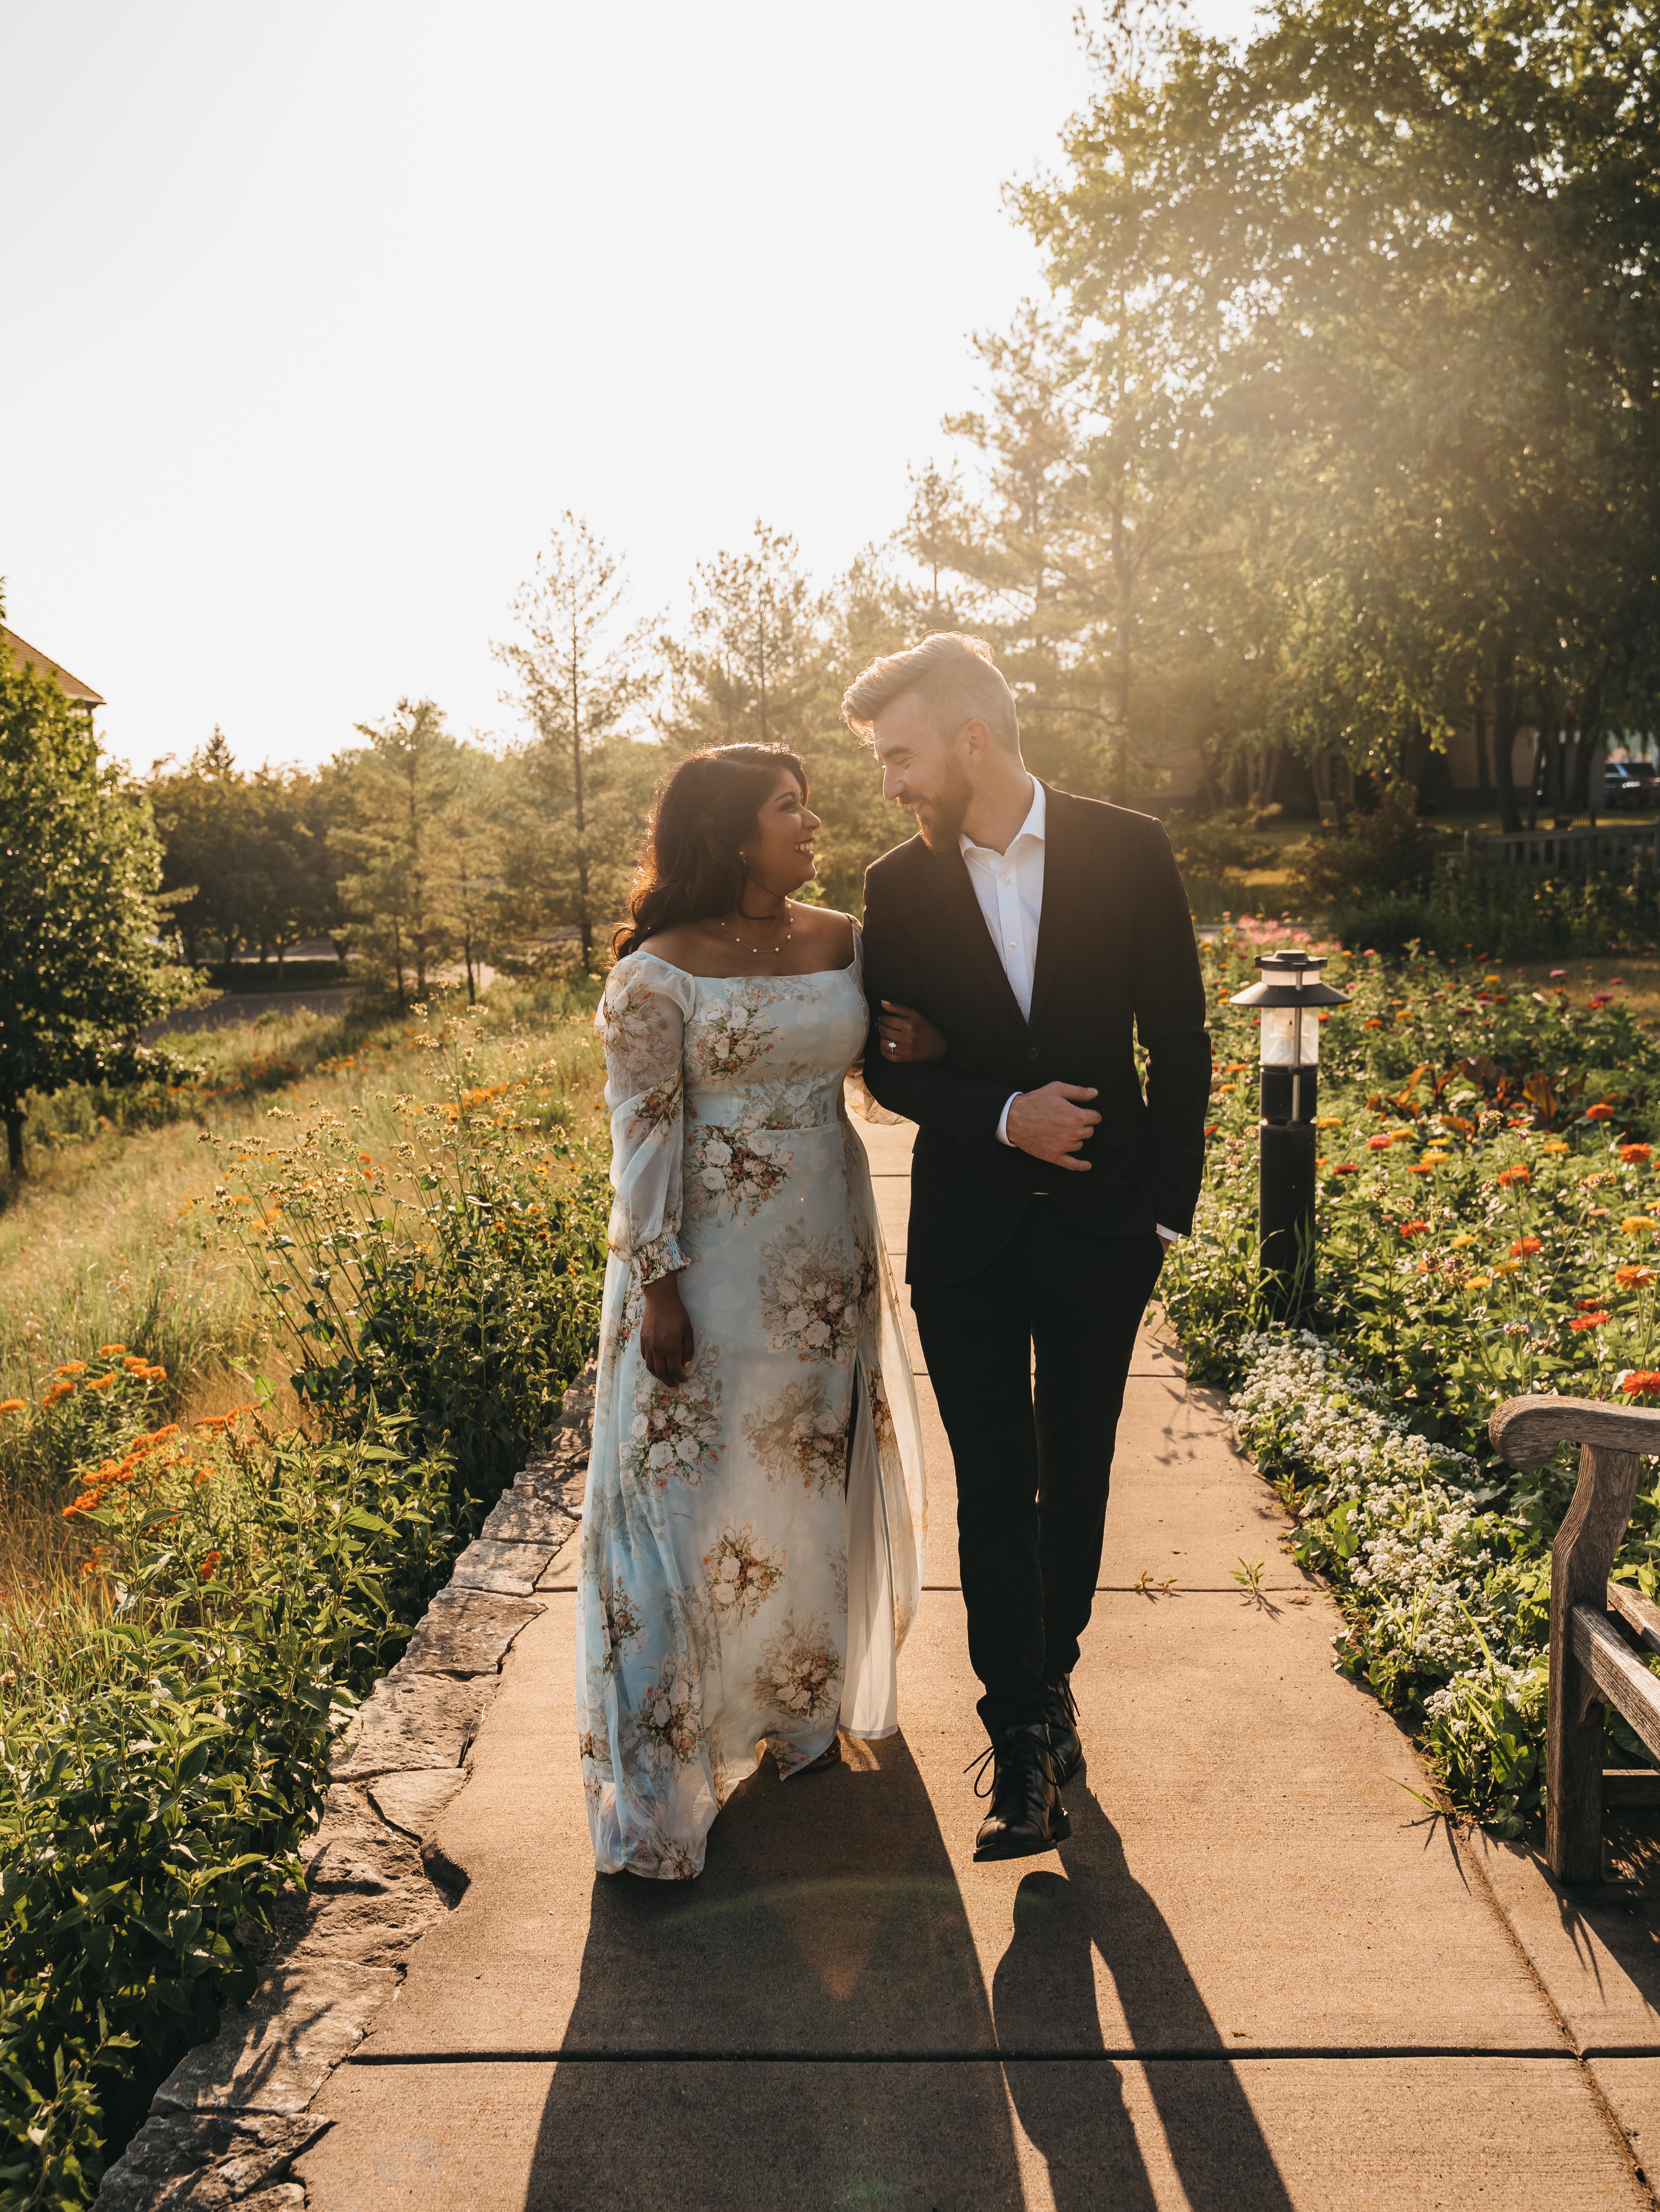 The Wedding Website of Becca Doma and Adolph Hernick